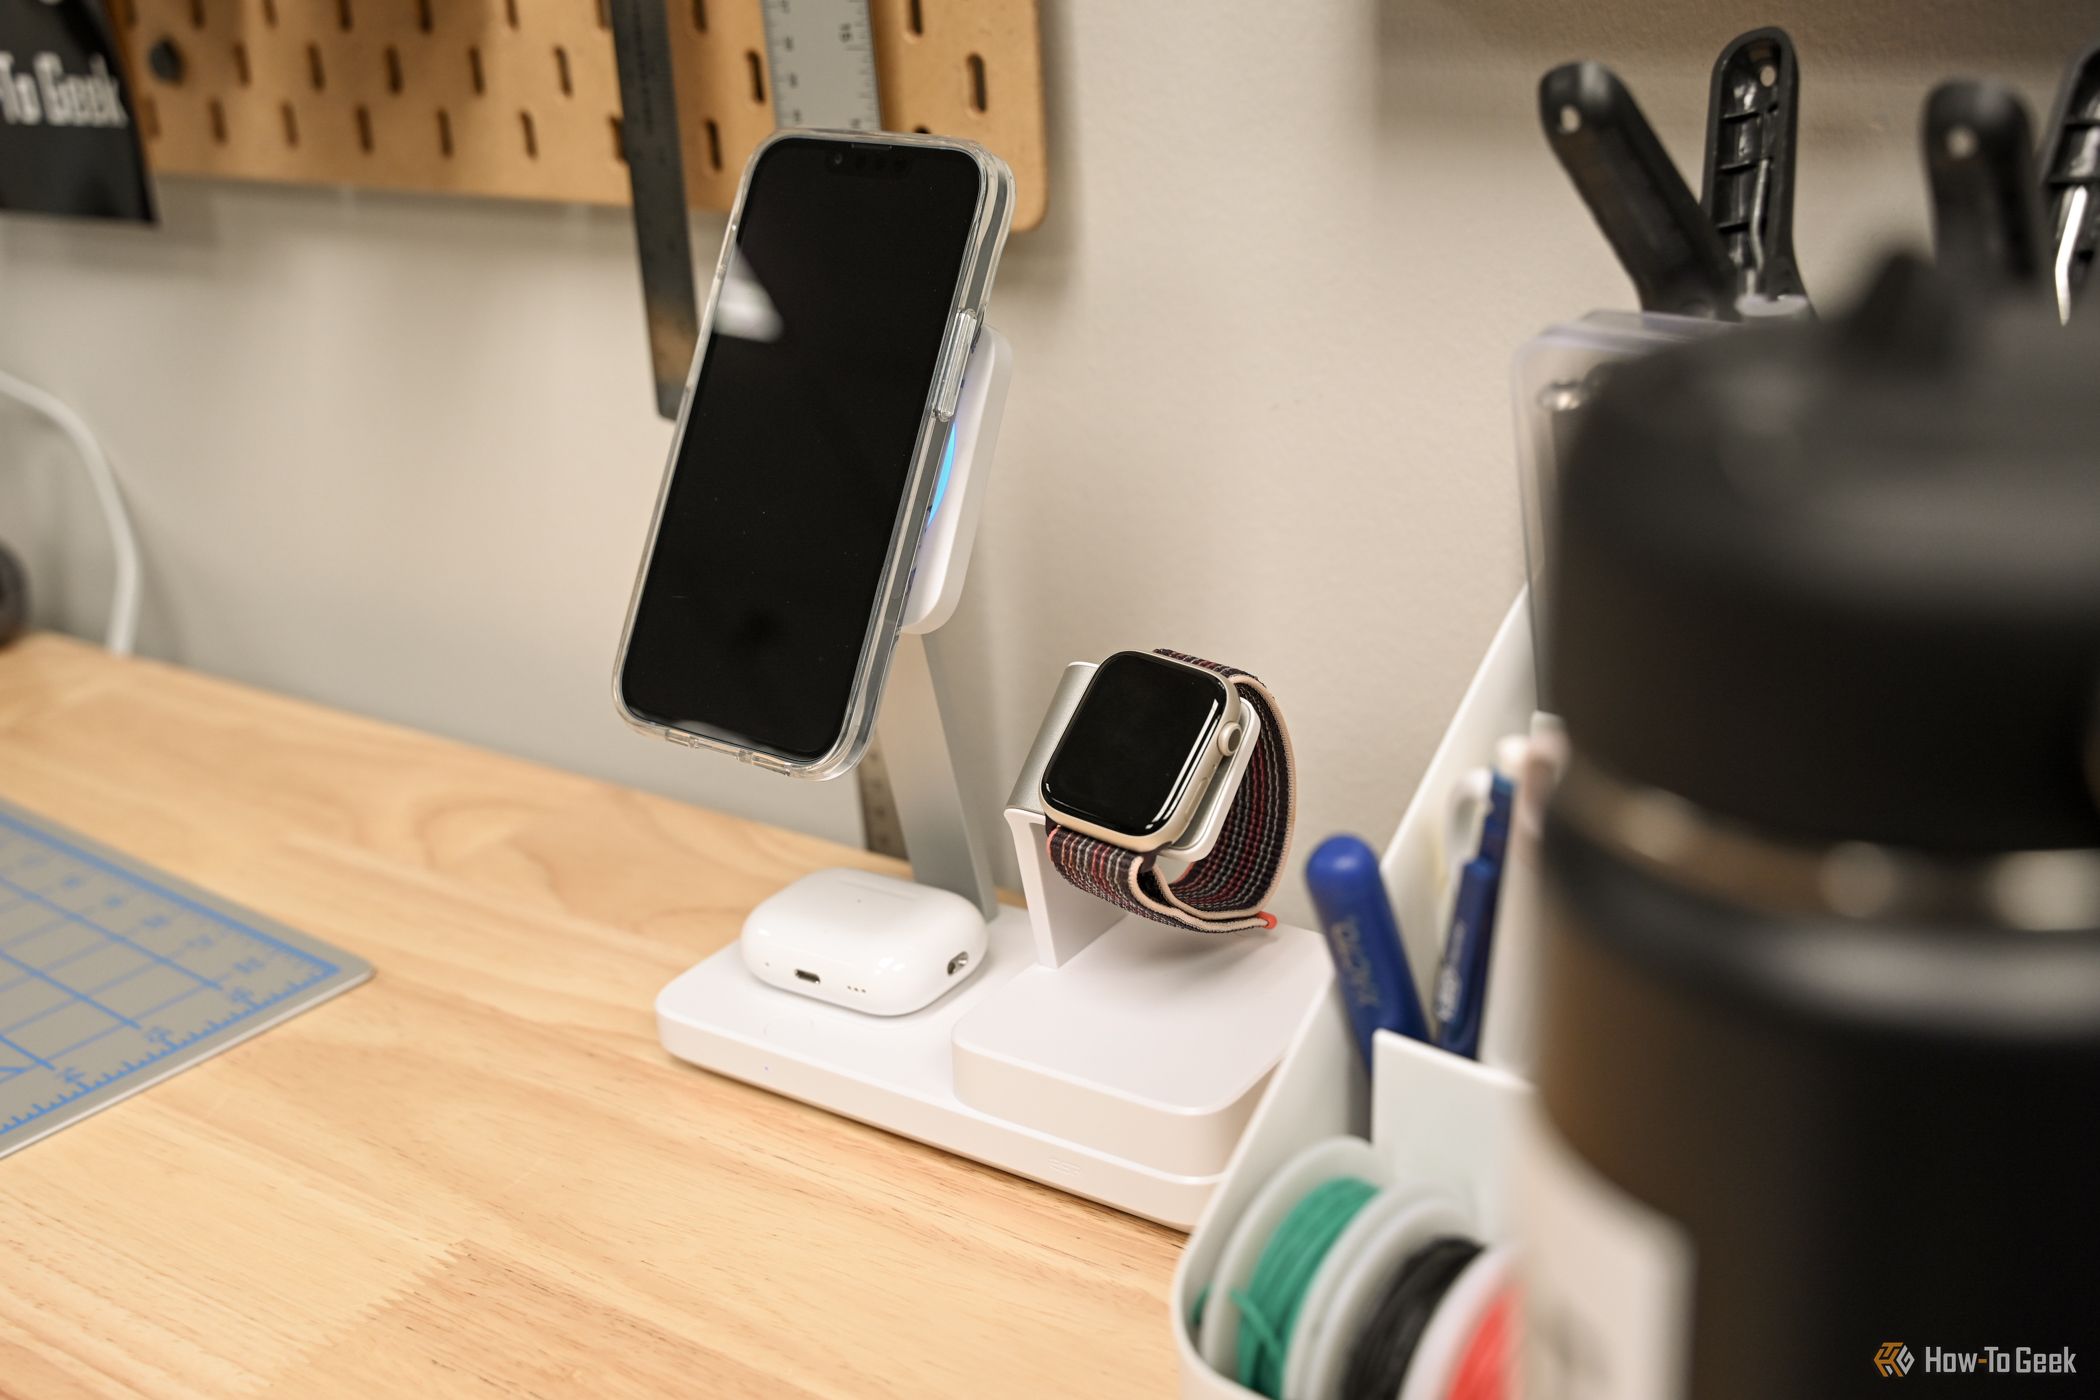 An iPhone, AirPods, and Apple Watch charging on the ESR 100W 6-in-1 Charging Station.